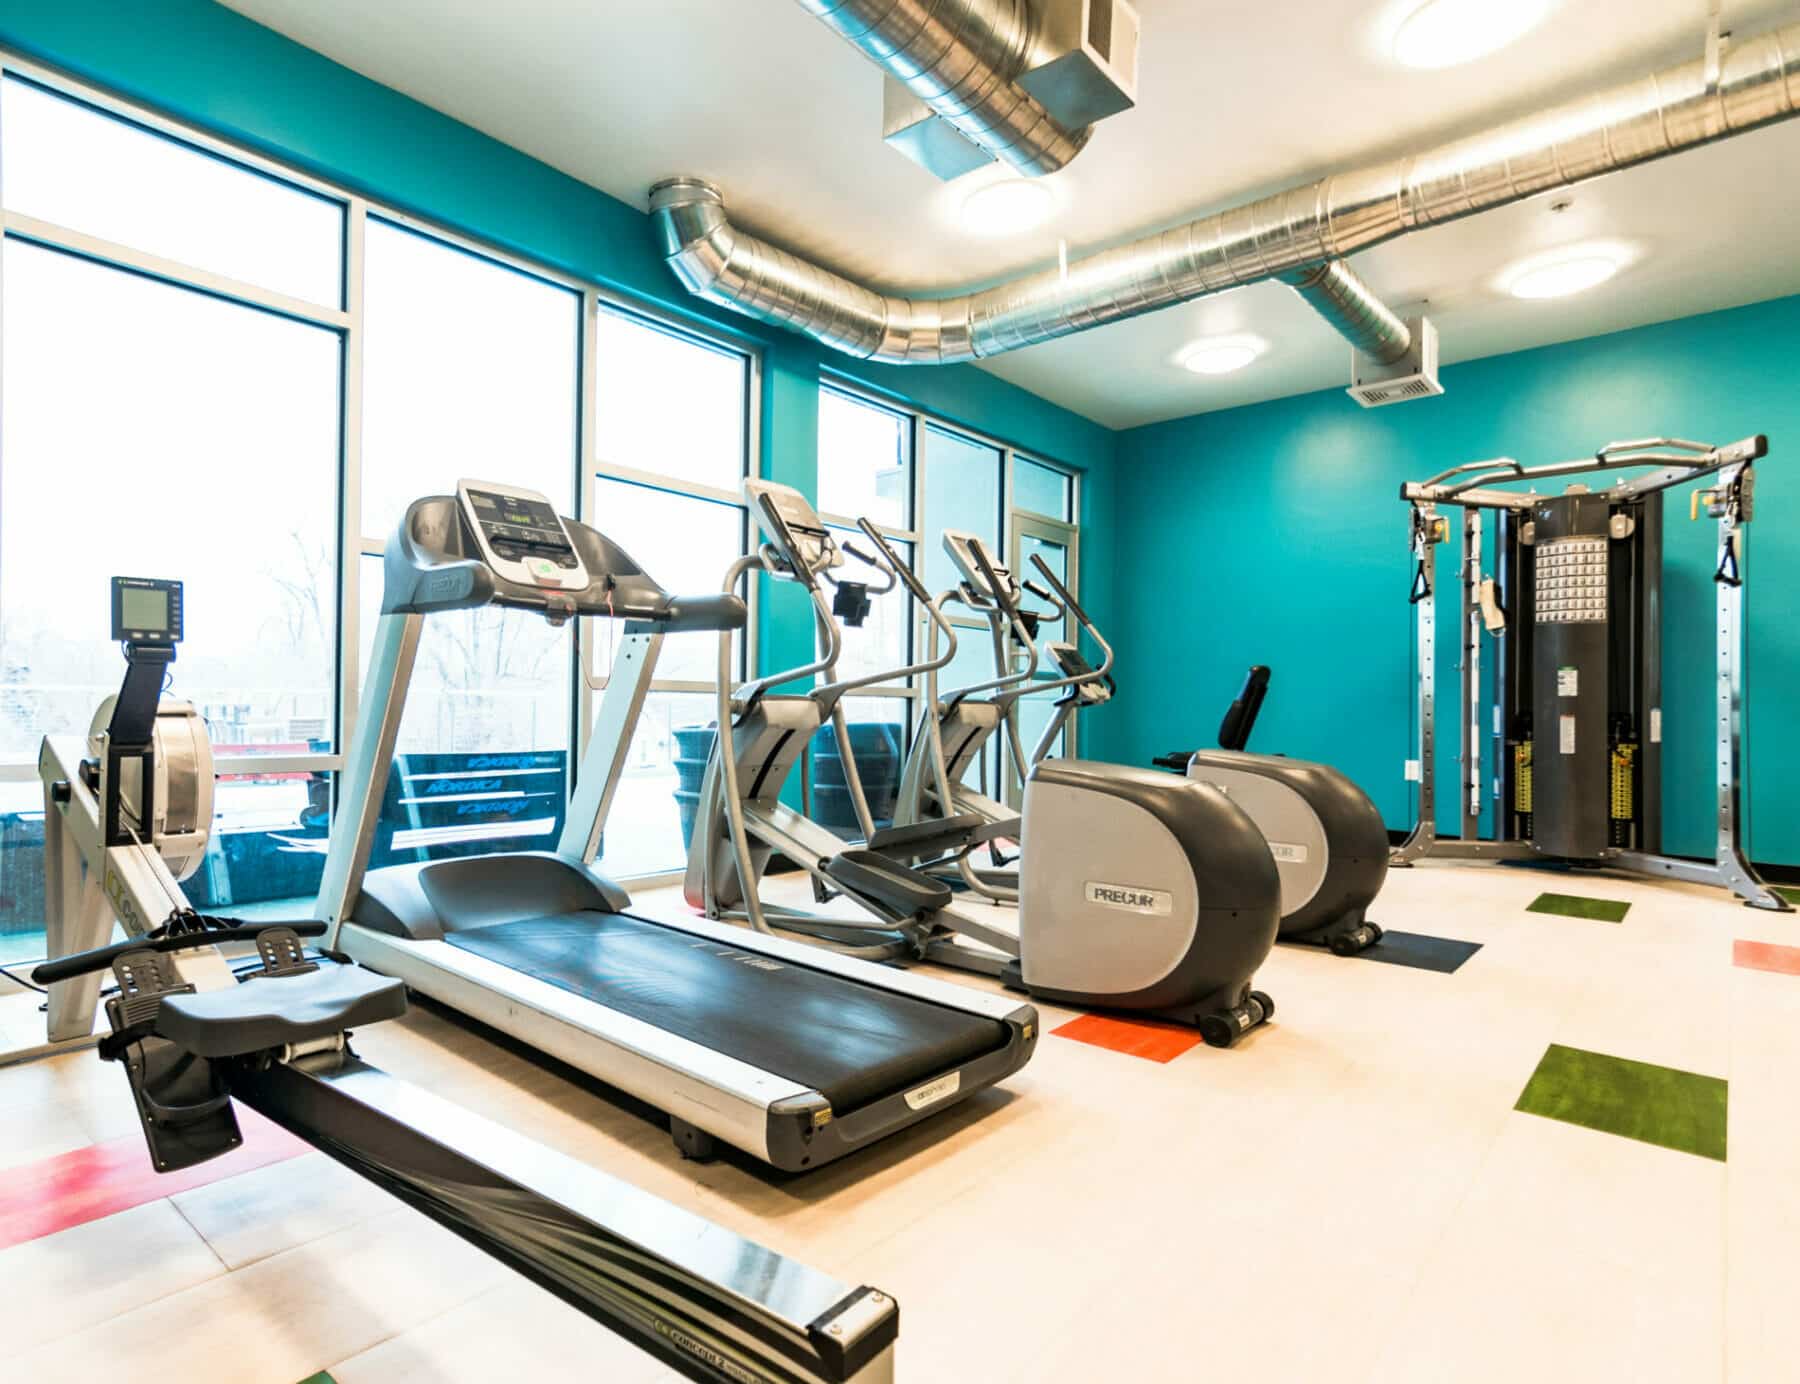 Gym Fitness Center | multifamily residential architectural design for commercial property developers in Salt Lake City, UT | Think Architecture